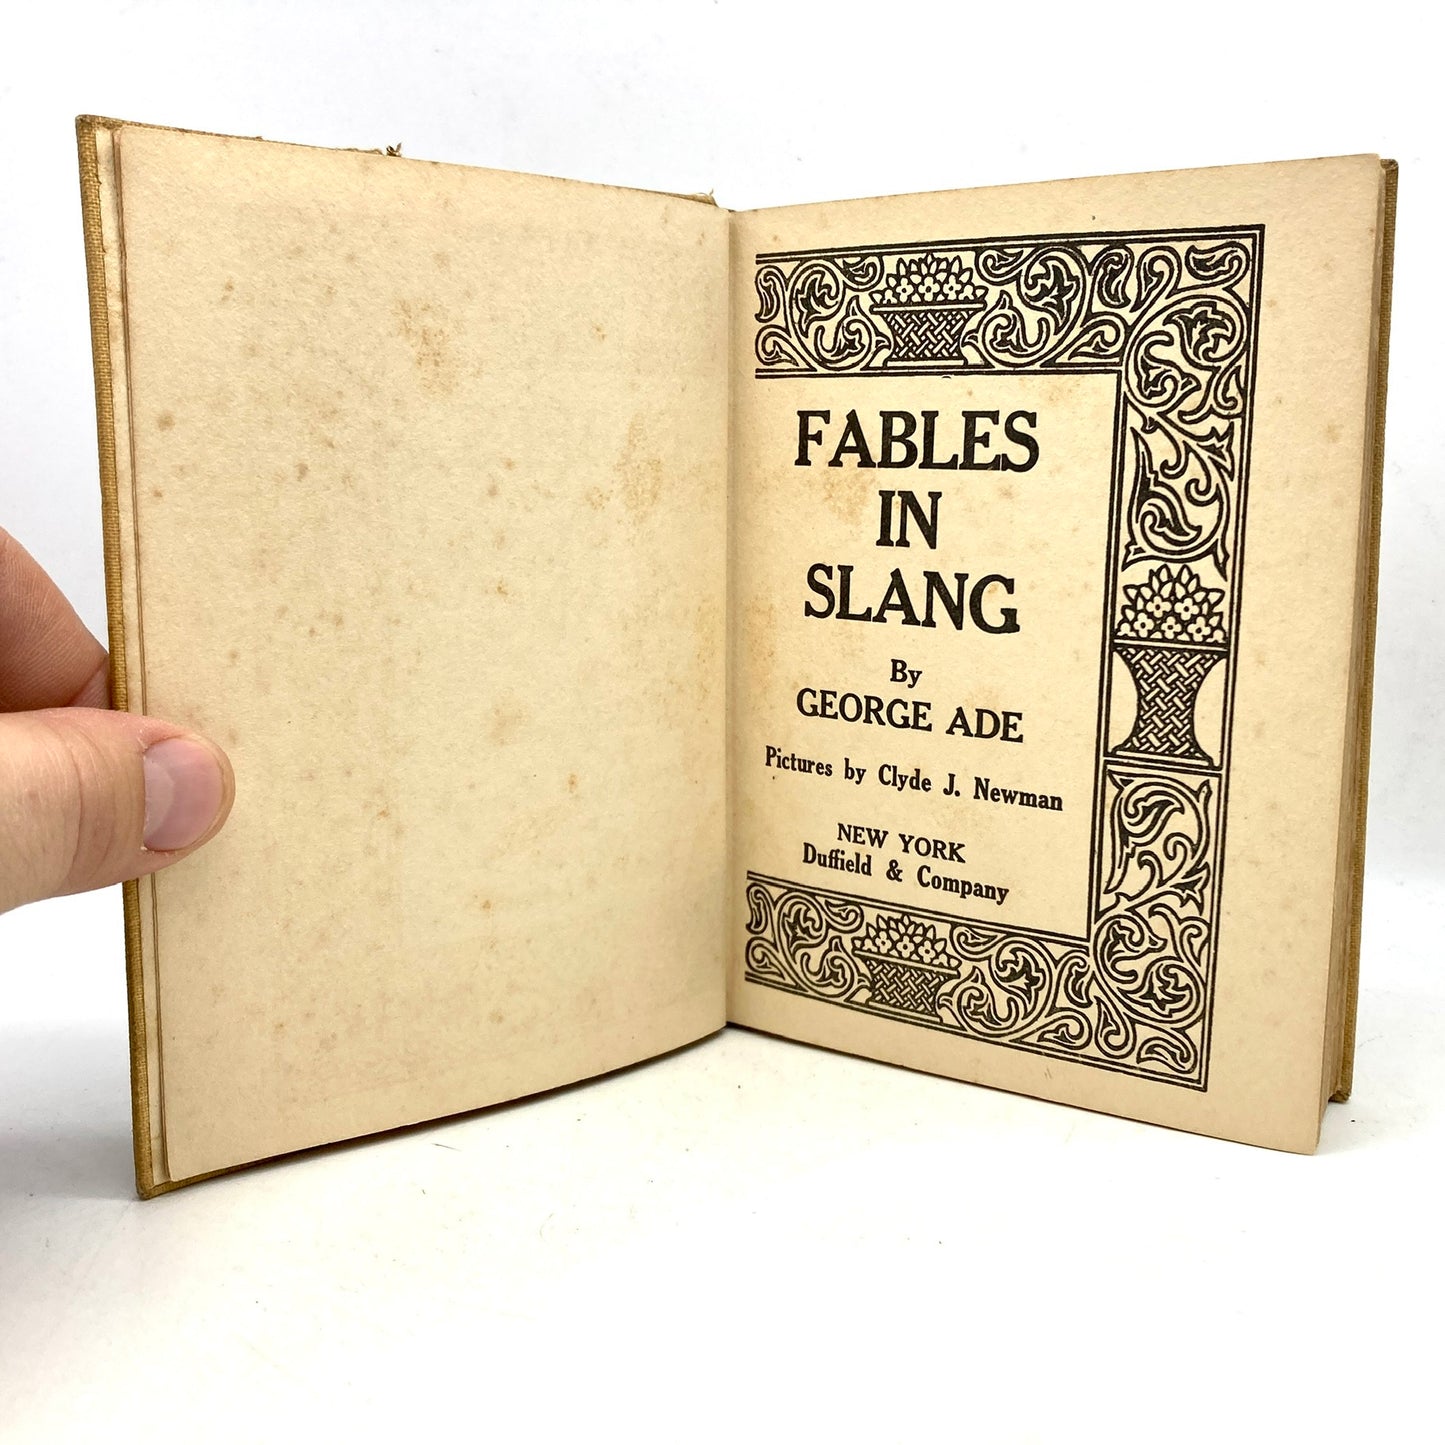 ADE, George "Fables in Slang" [Duffield & Co, 1899] - Buzz Bookstore